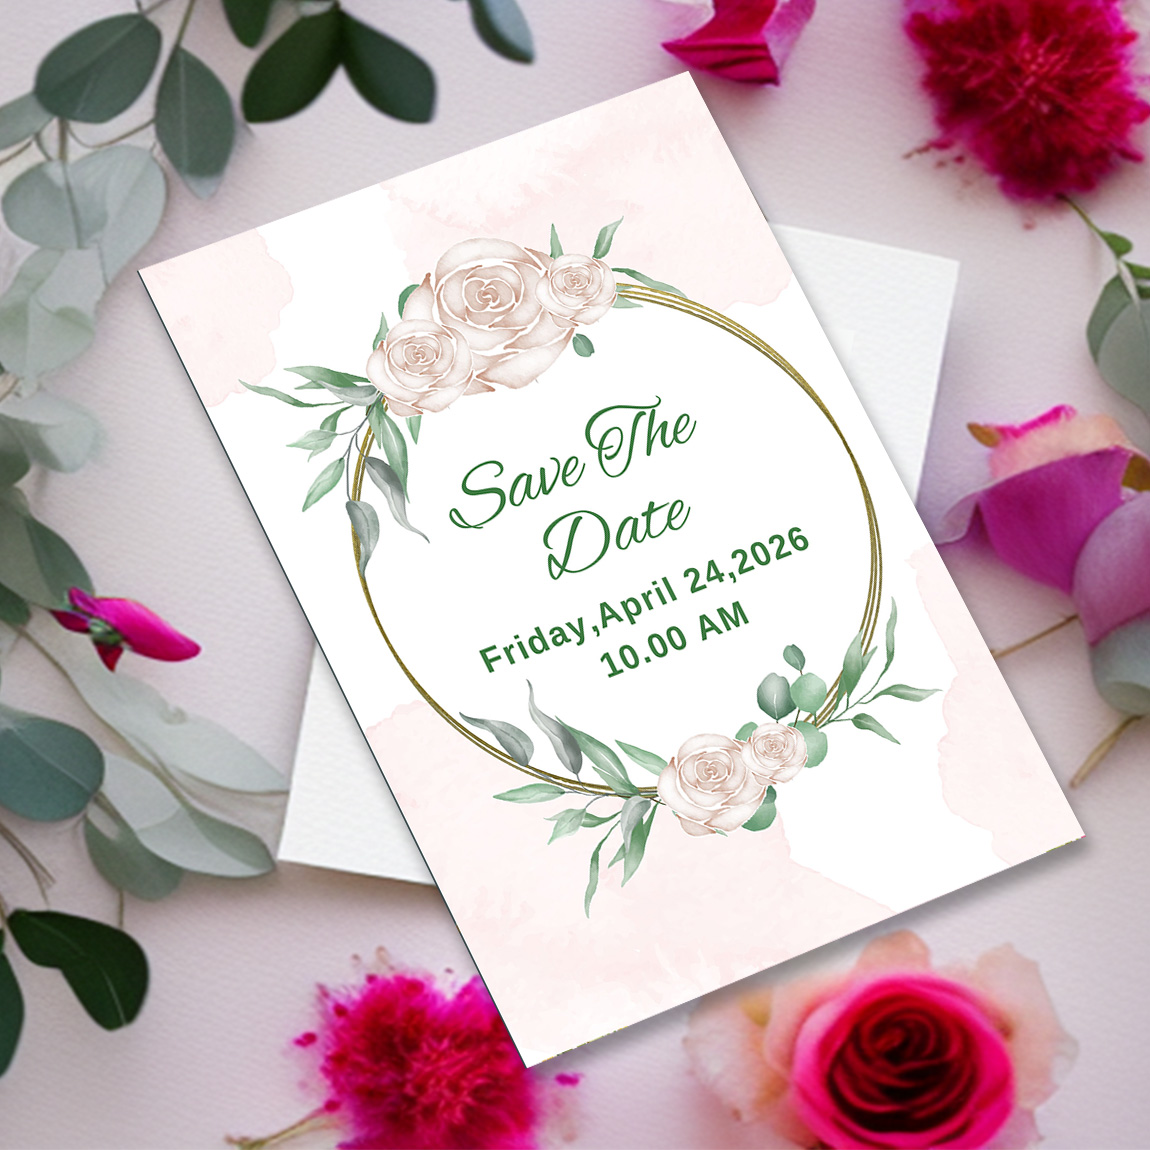 Image with amazing wedding invitation card with watercolor roses.